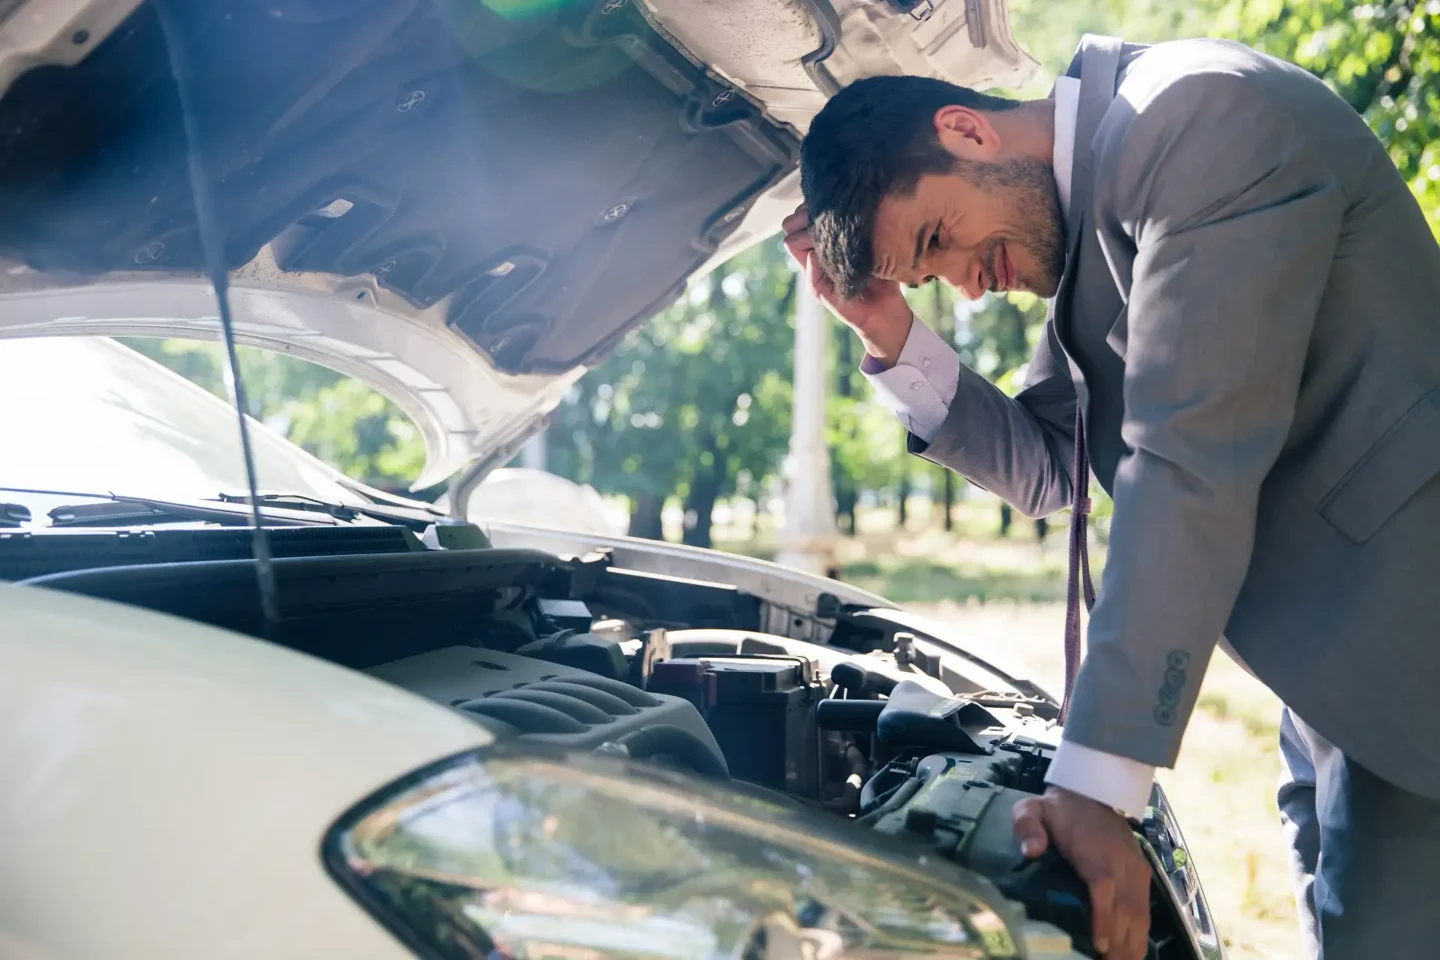 A man in a suit appears frustrated while looking at an open car hood, suggesting car trouble.